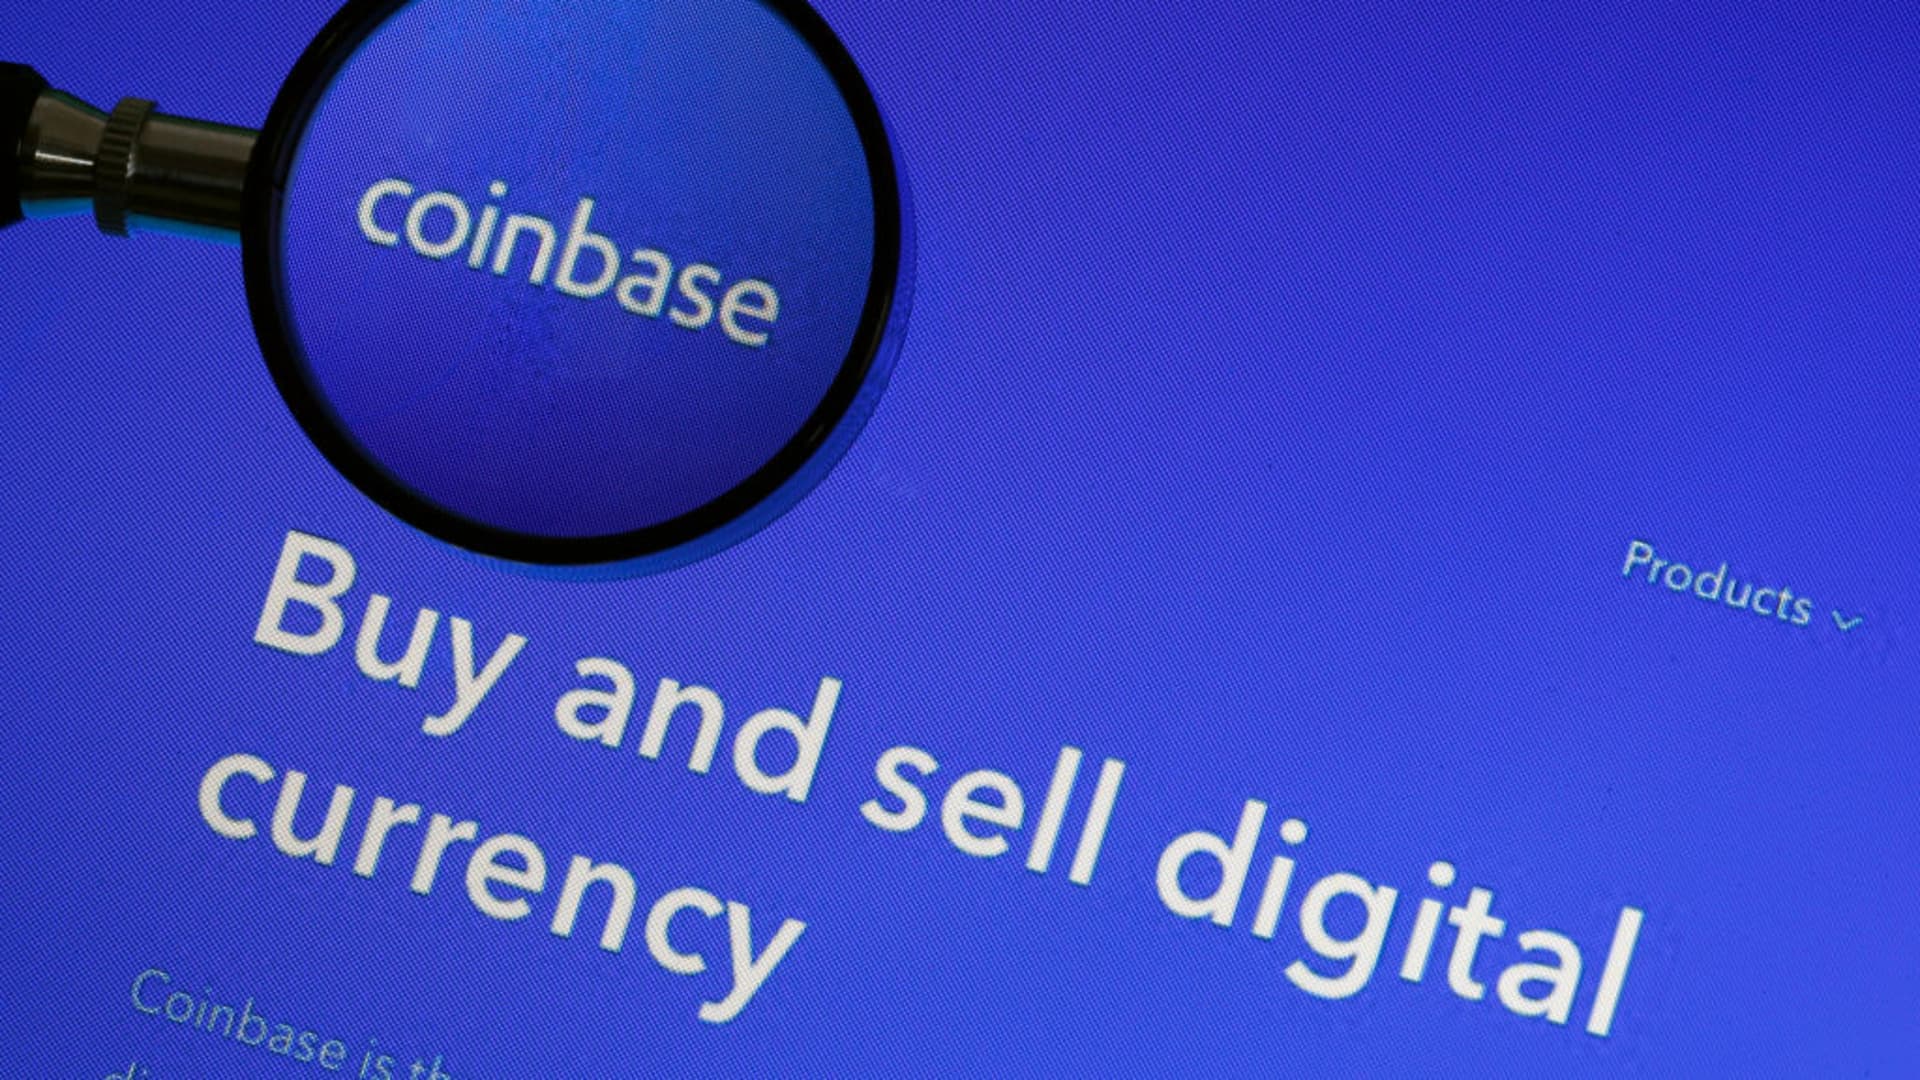 Coinbase takes stake in stablecoin firm Circle, shuts down joint venture as it sees 'regulatory clarity'